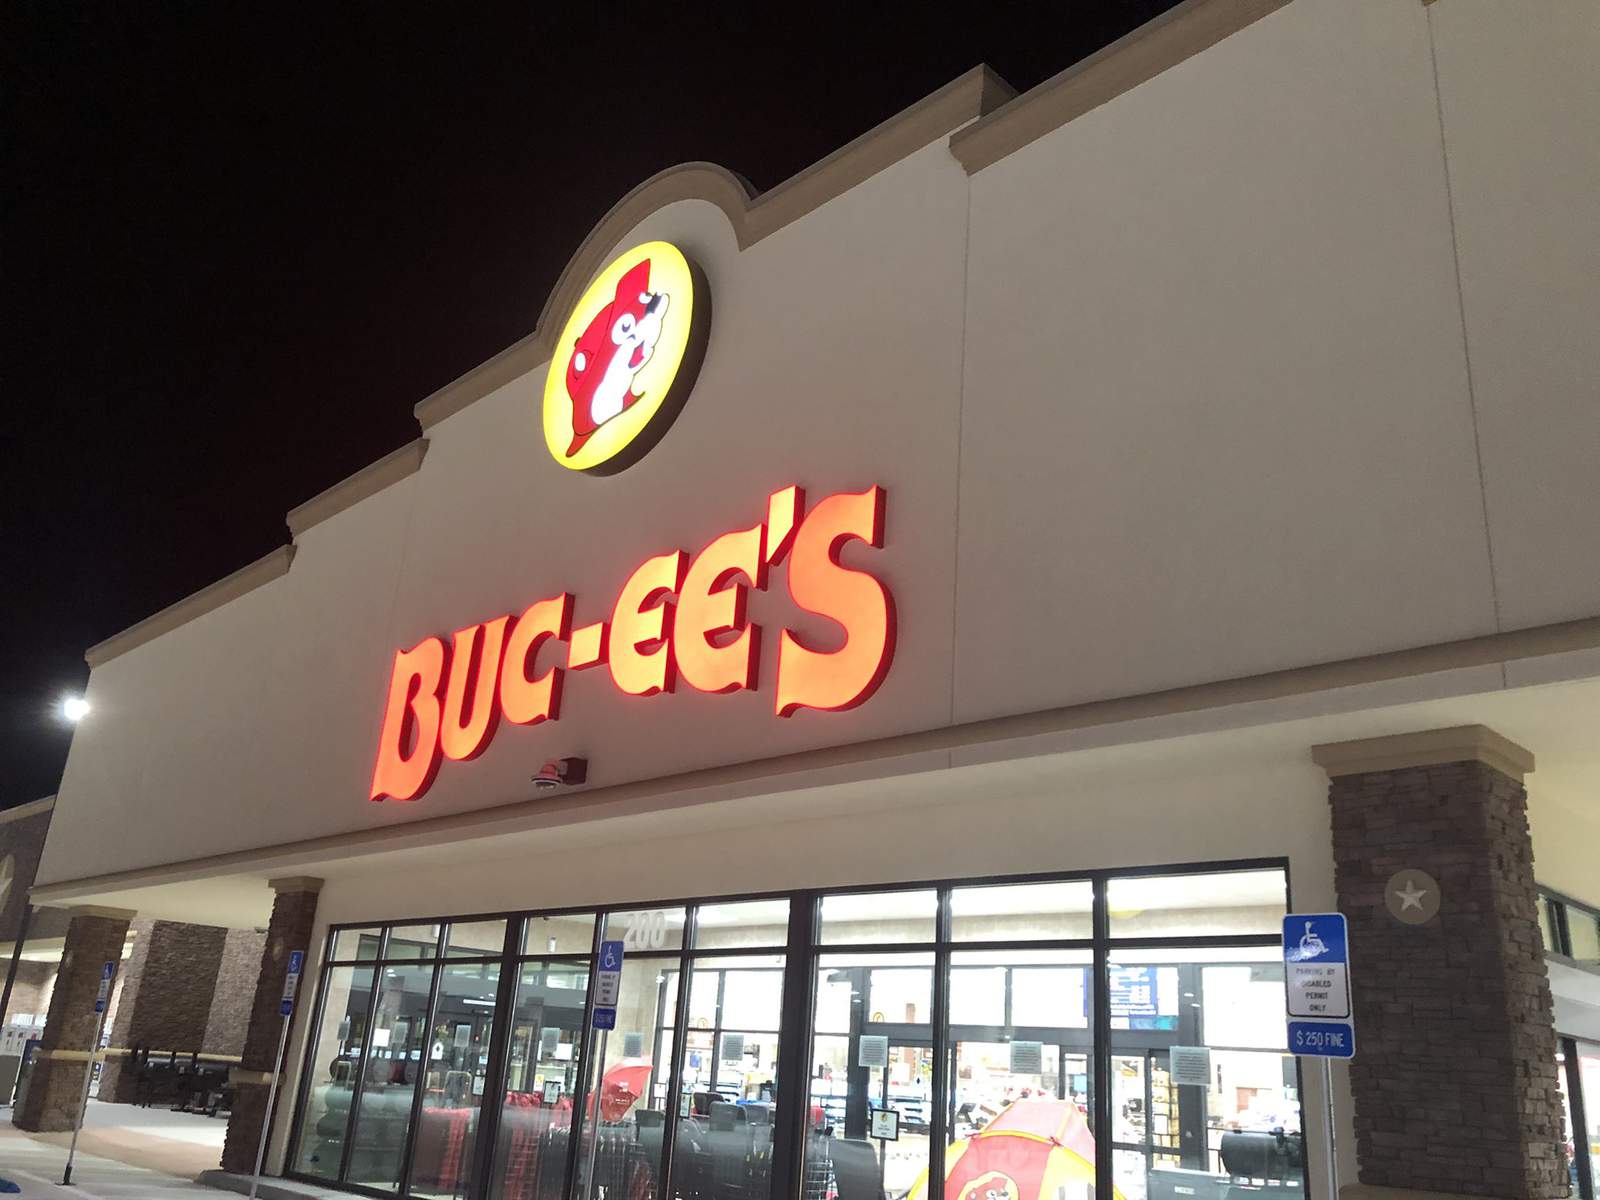 The line-up starts hours early for the opening of the first Buc-ee’s travel center in Florida